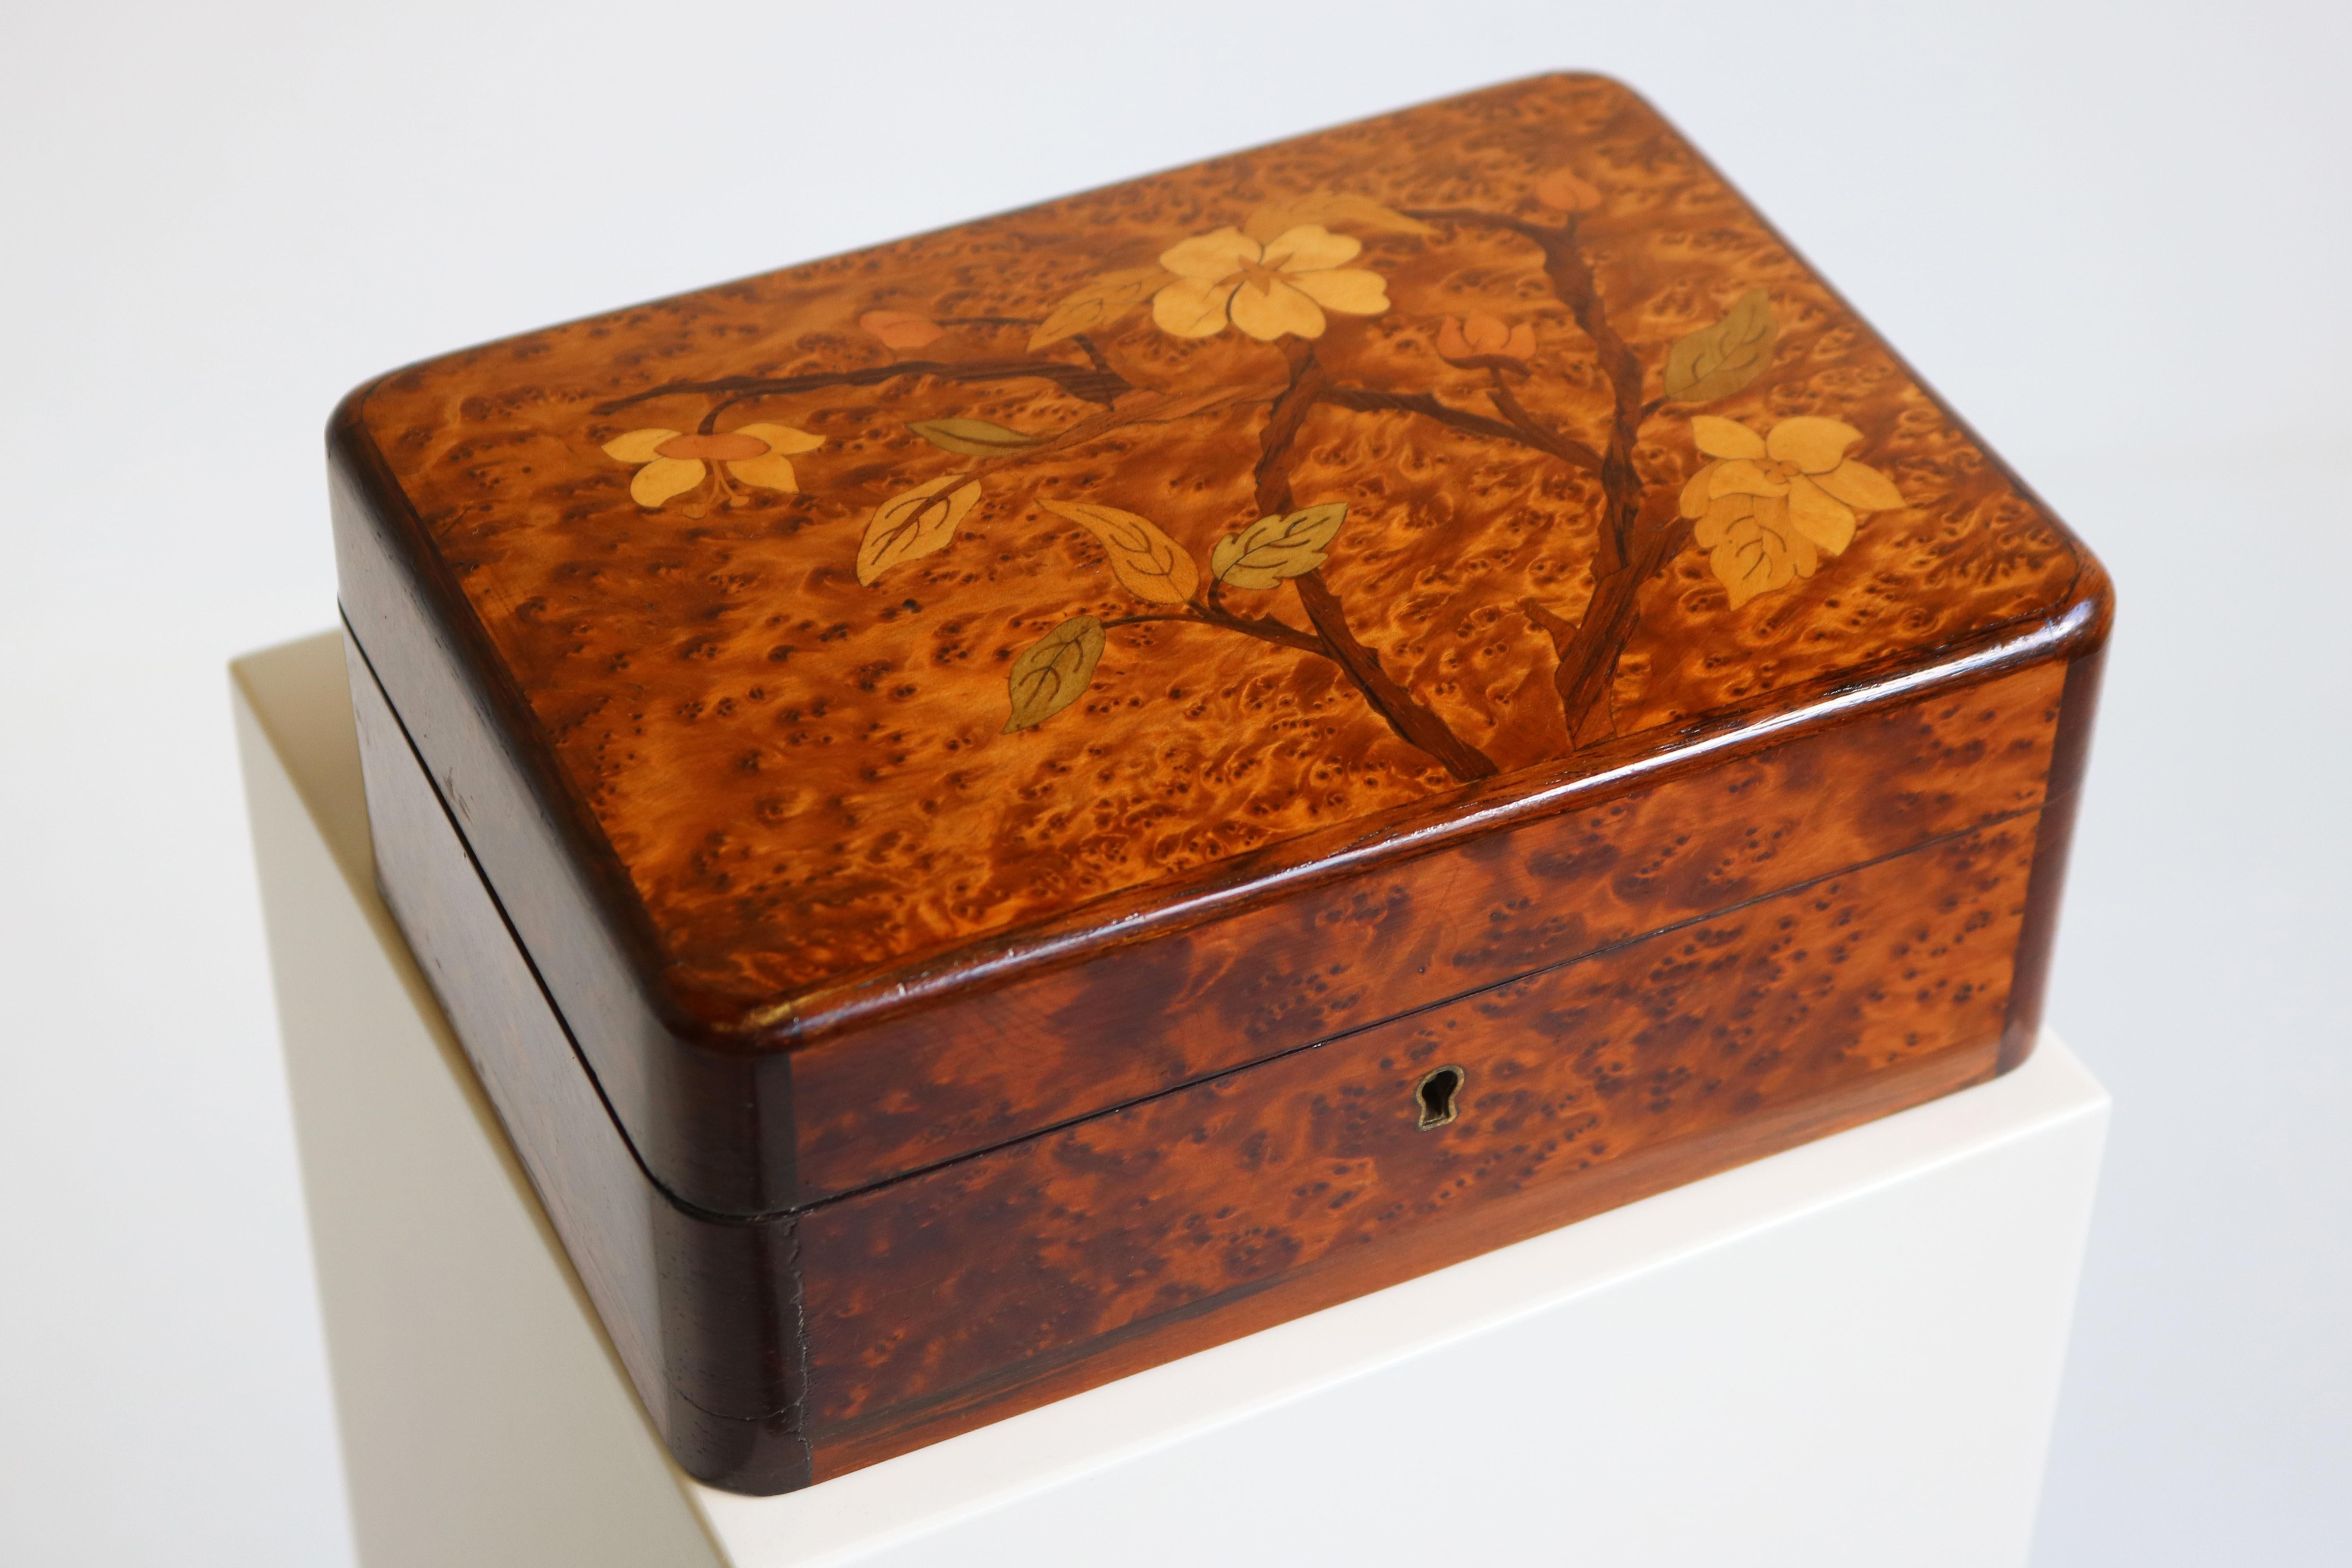 Antique French Art Nouveau / Jugendstil Jewelry Box in Burl Wood & Floral Inlay 13